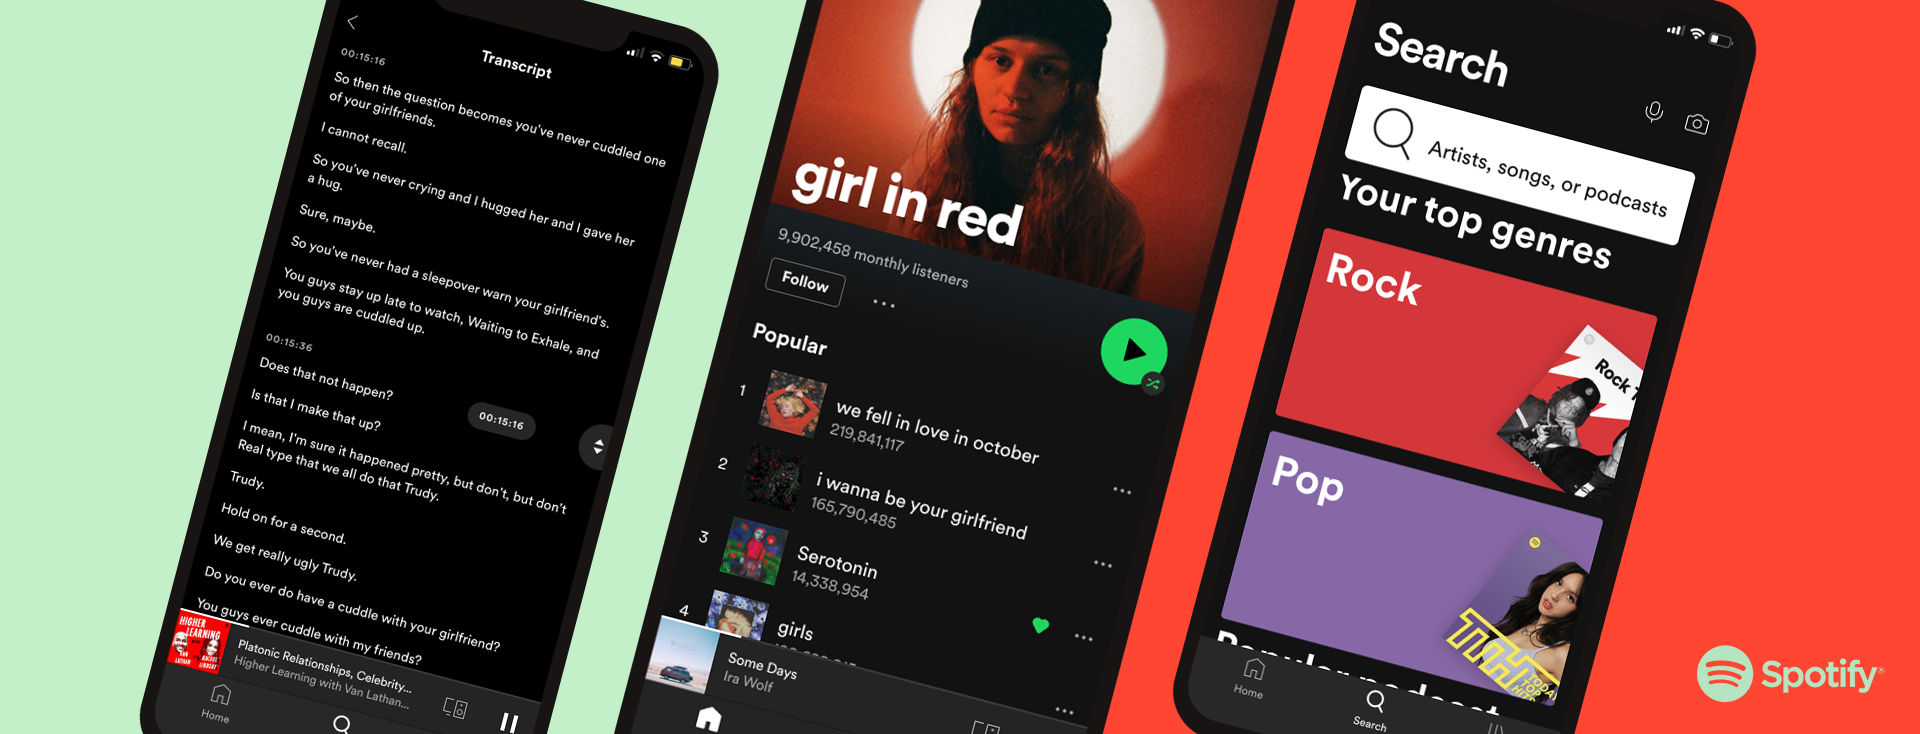 Spotify Reveals Three Big Changes Coming to the Platform